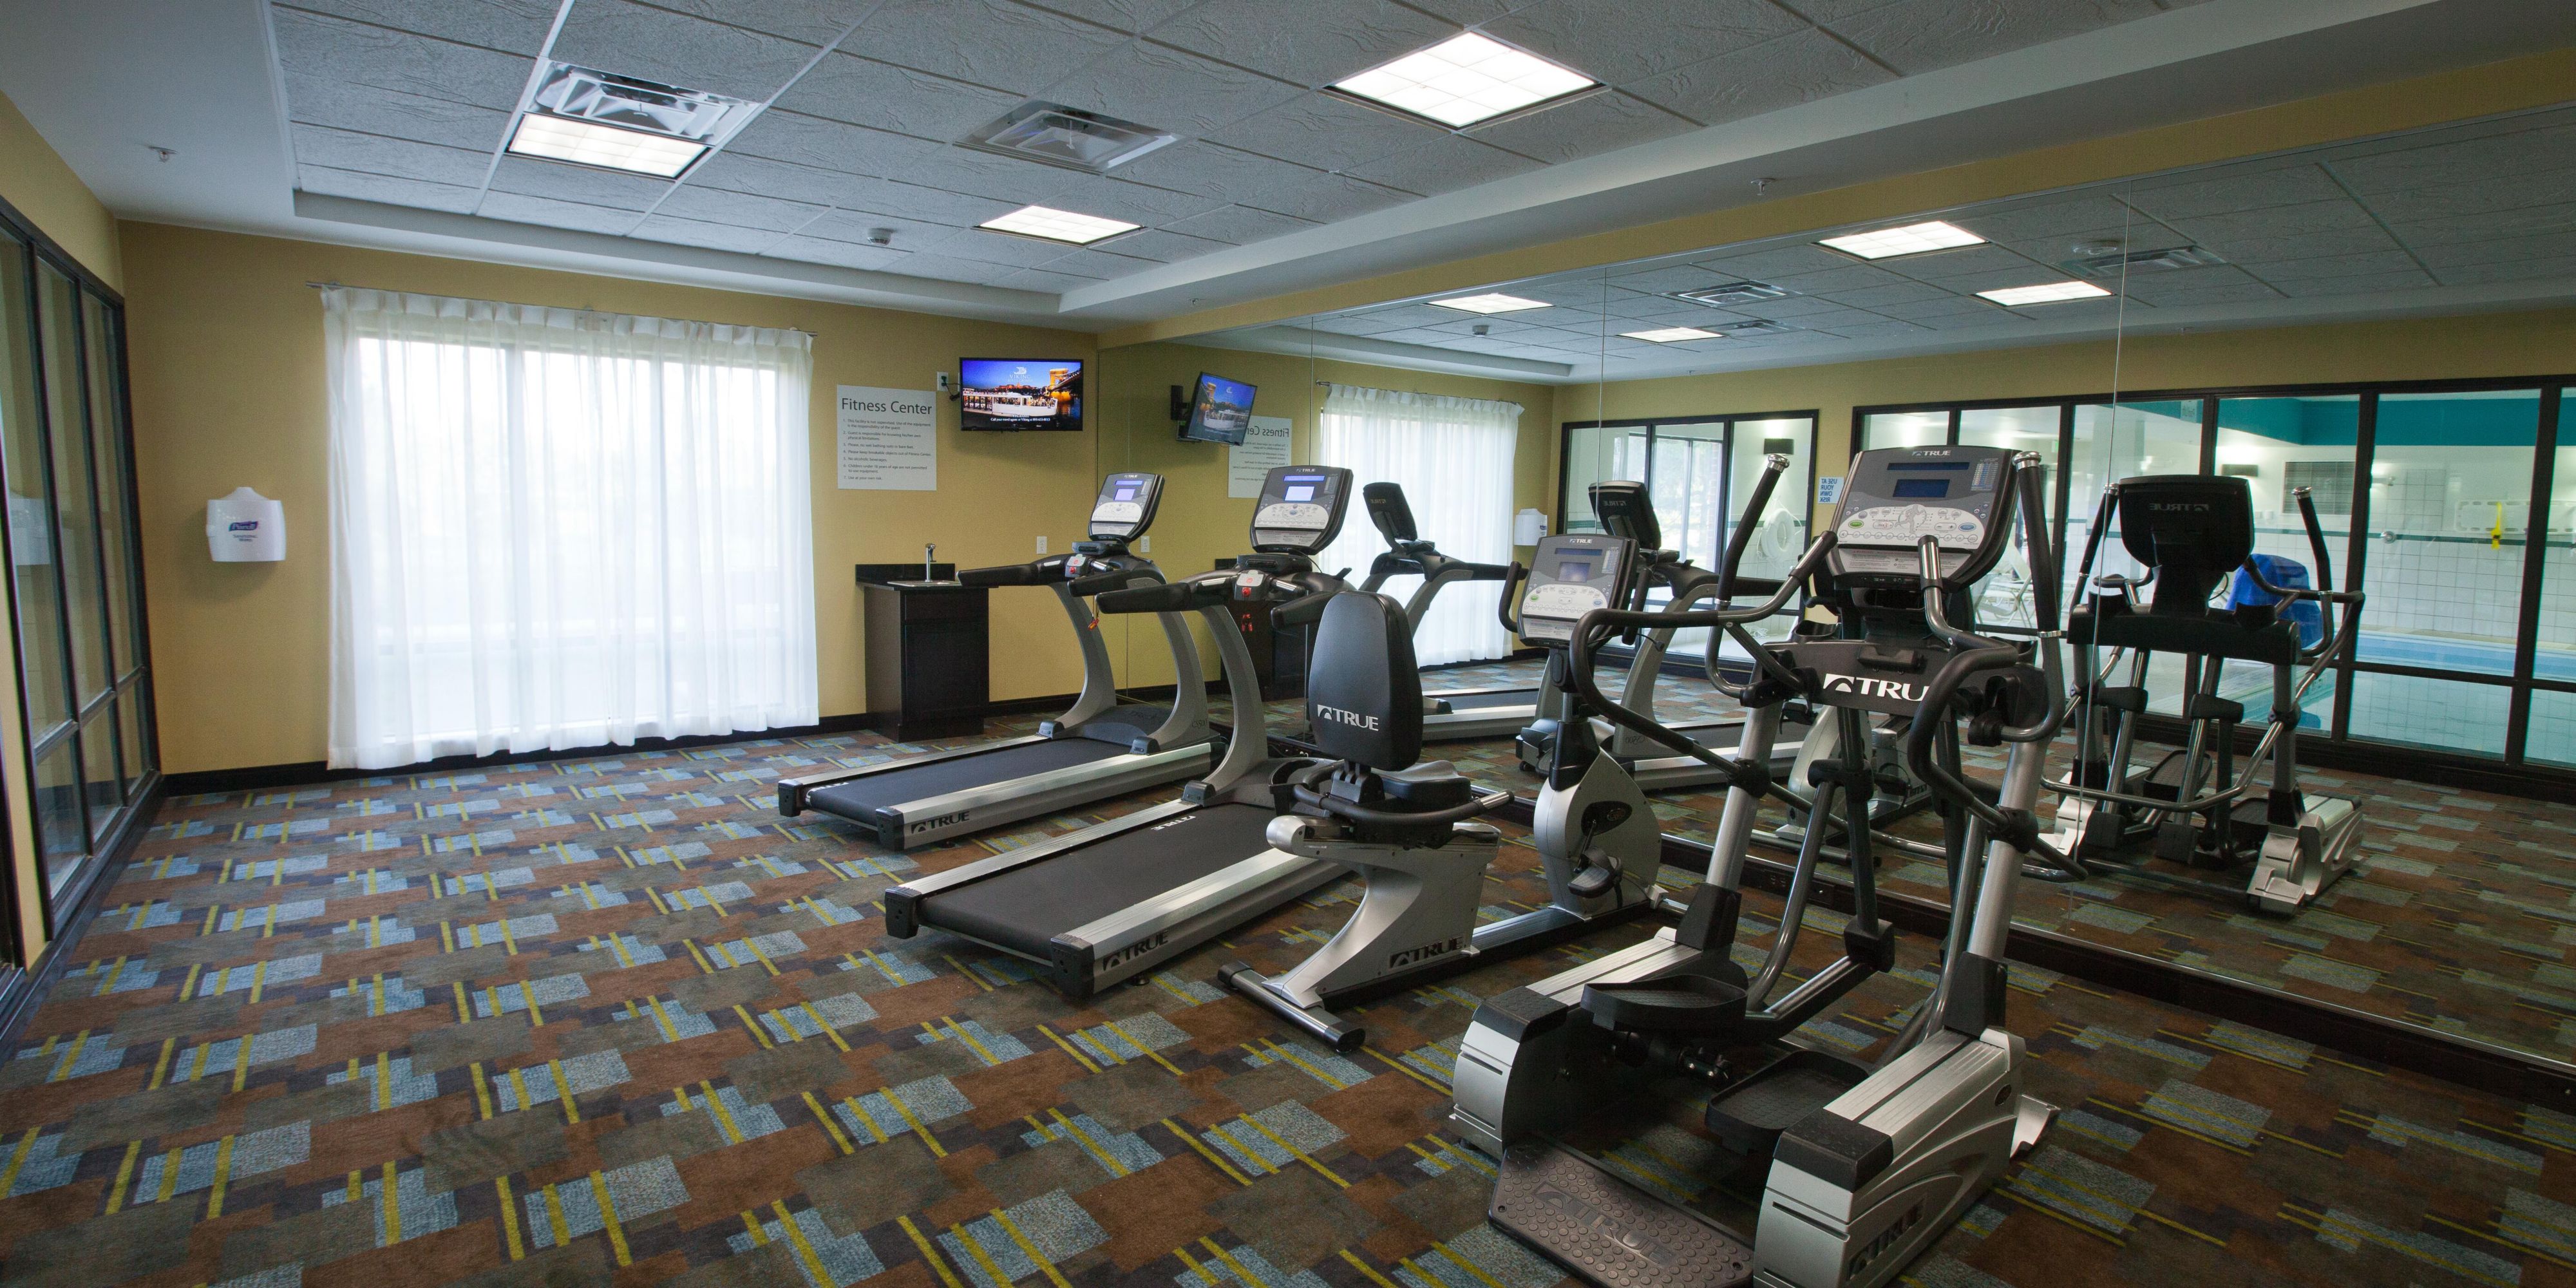 Start your day off feeling your best with our equipment (Equip. may vary from photo). We have a treadmill and an elliptical that include their own individual television screens so you can choose what you watch while you work out! Hand weights, yoga mats and medicine balls are available in our open workout area. 